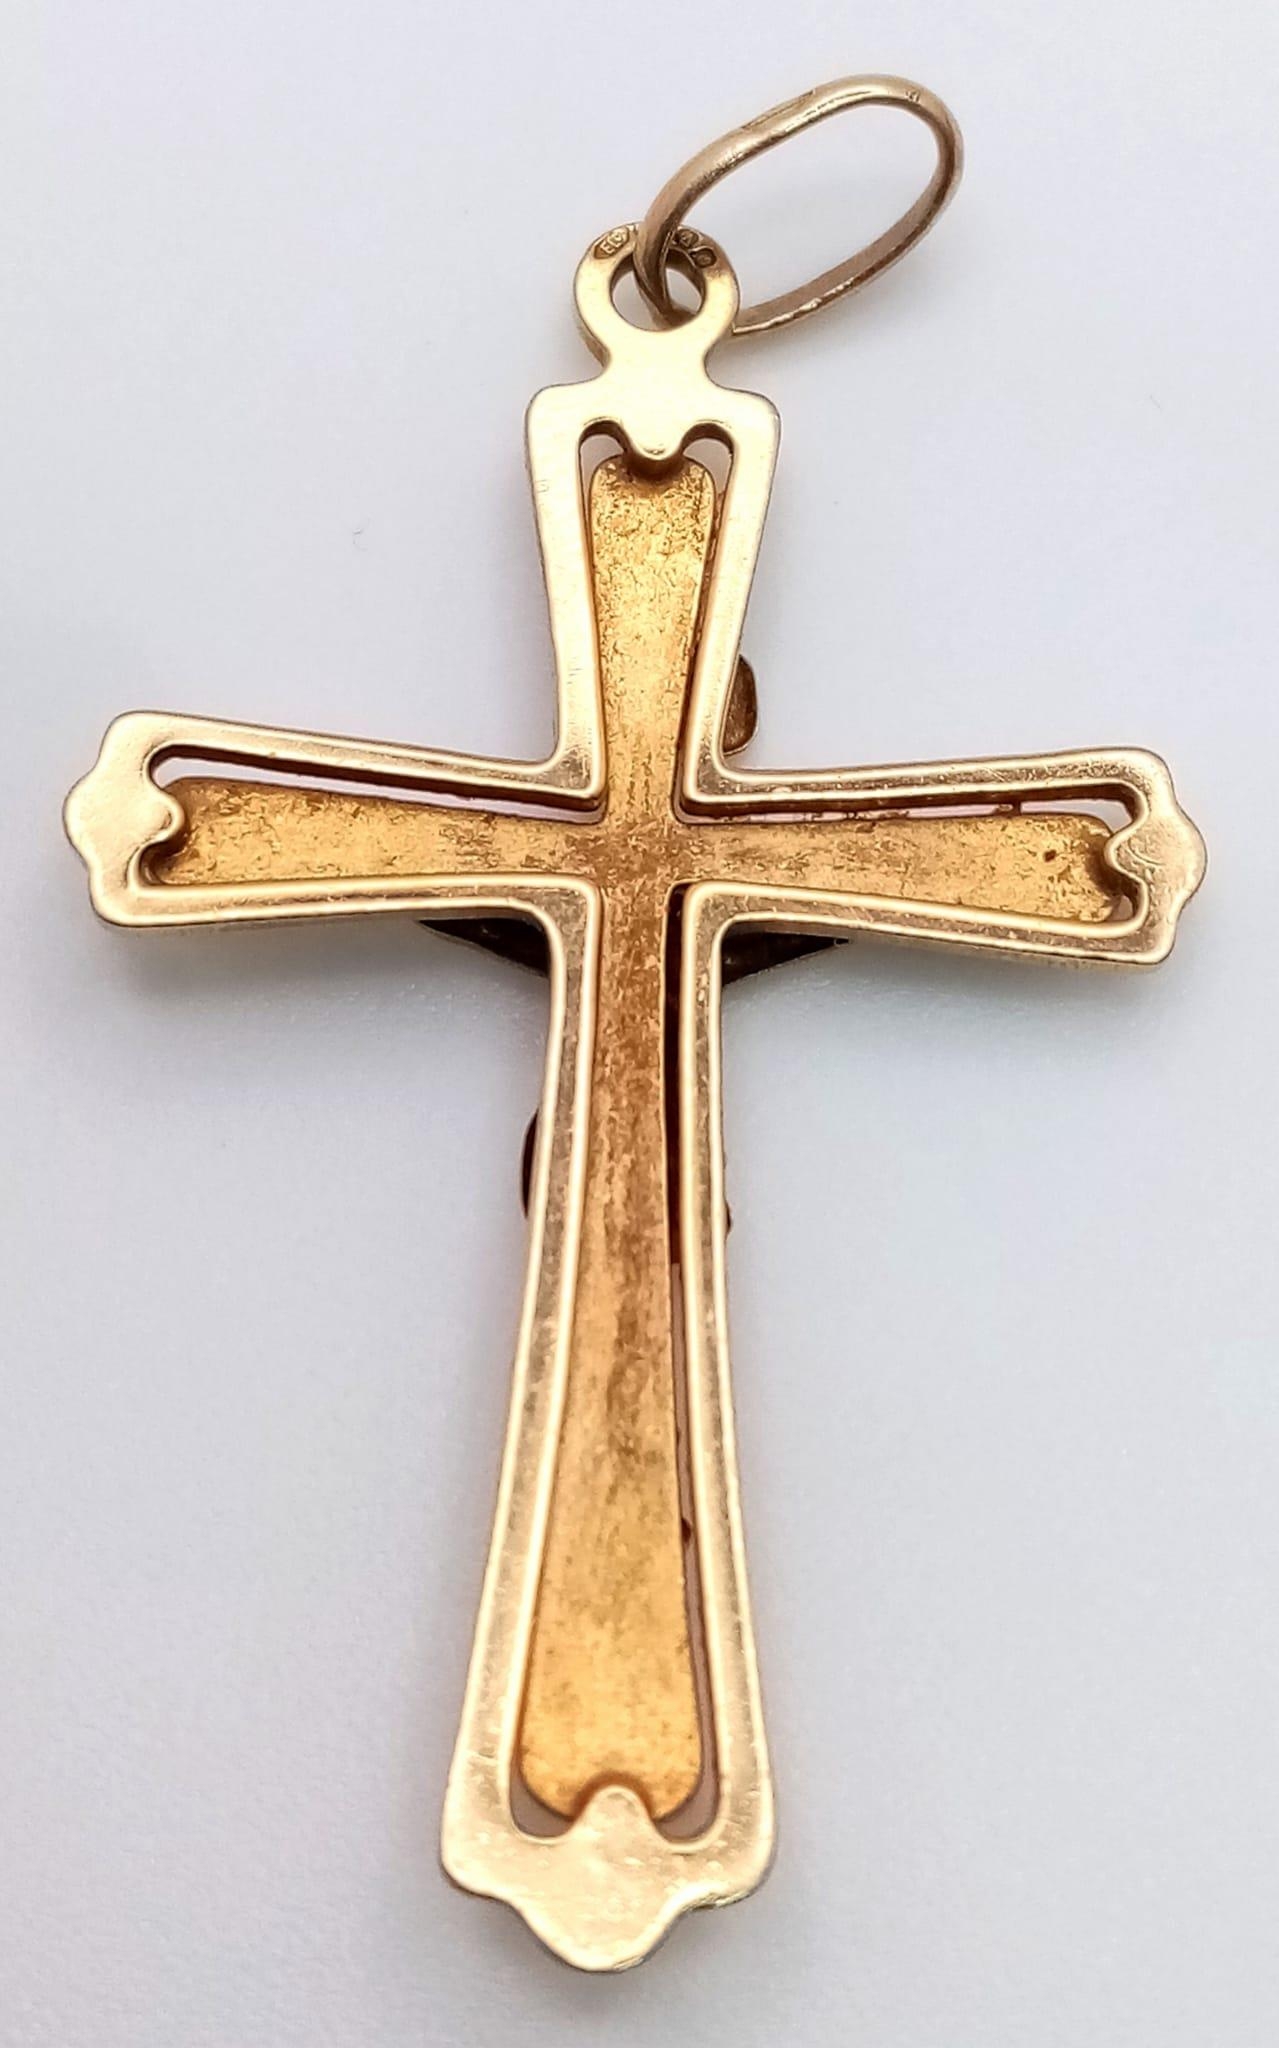 9K Yellow Gold Crucifix Pendant, 2.5g total weight - Image 2 of 3